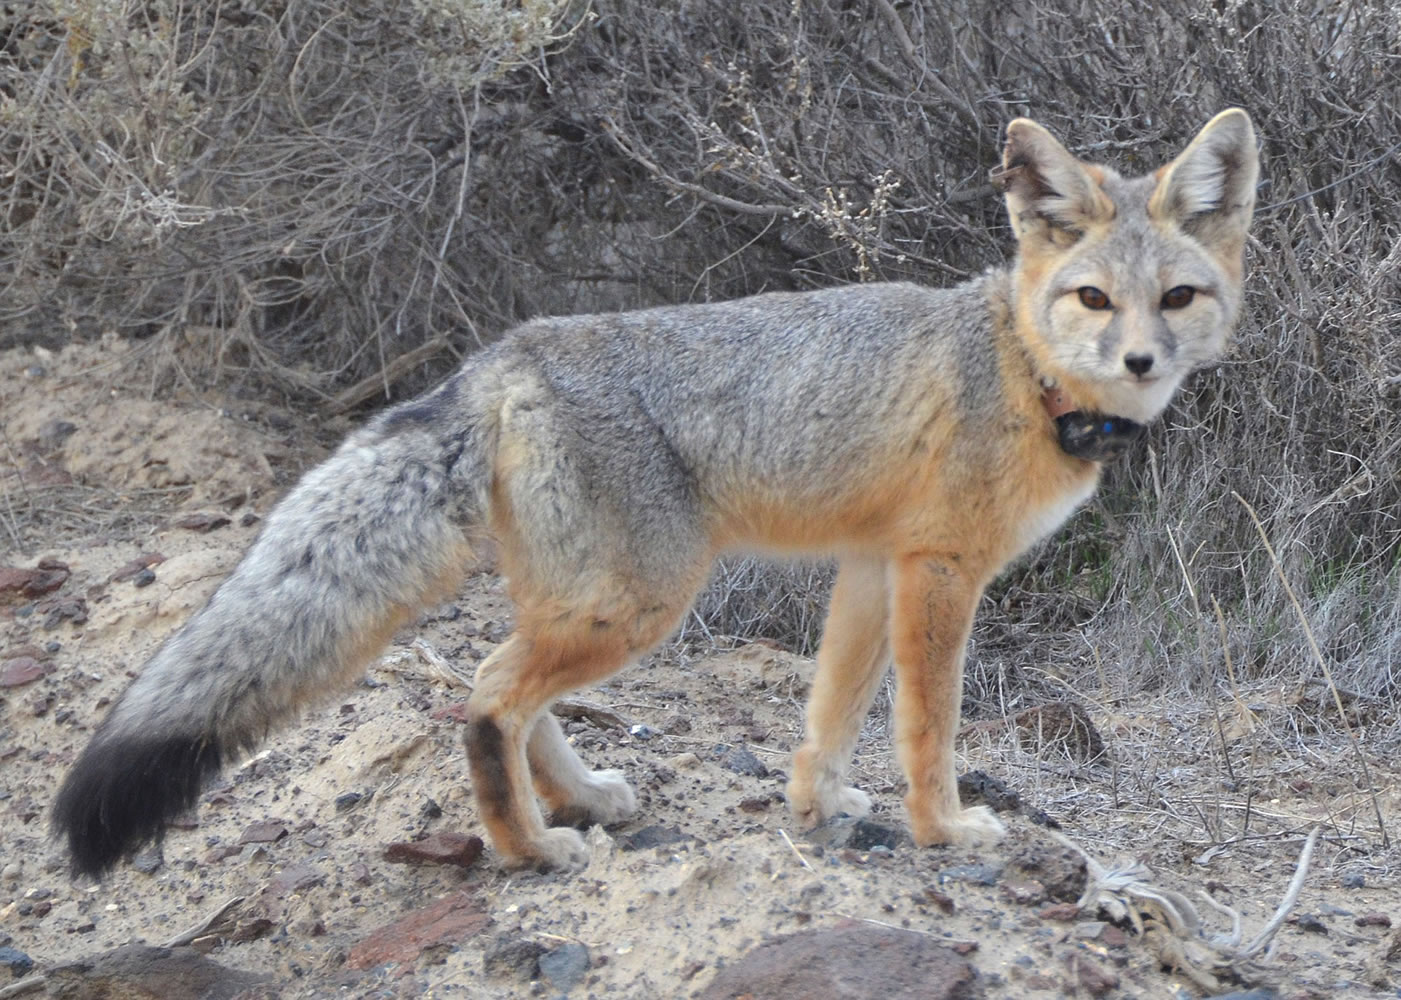 It's just in the past year that GPS tracking collars have been made small and light enough for a 4- to 6-pound kit fox to wear.